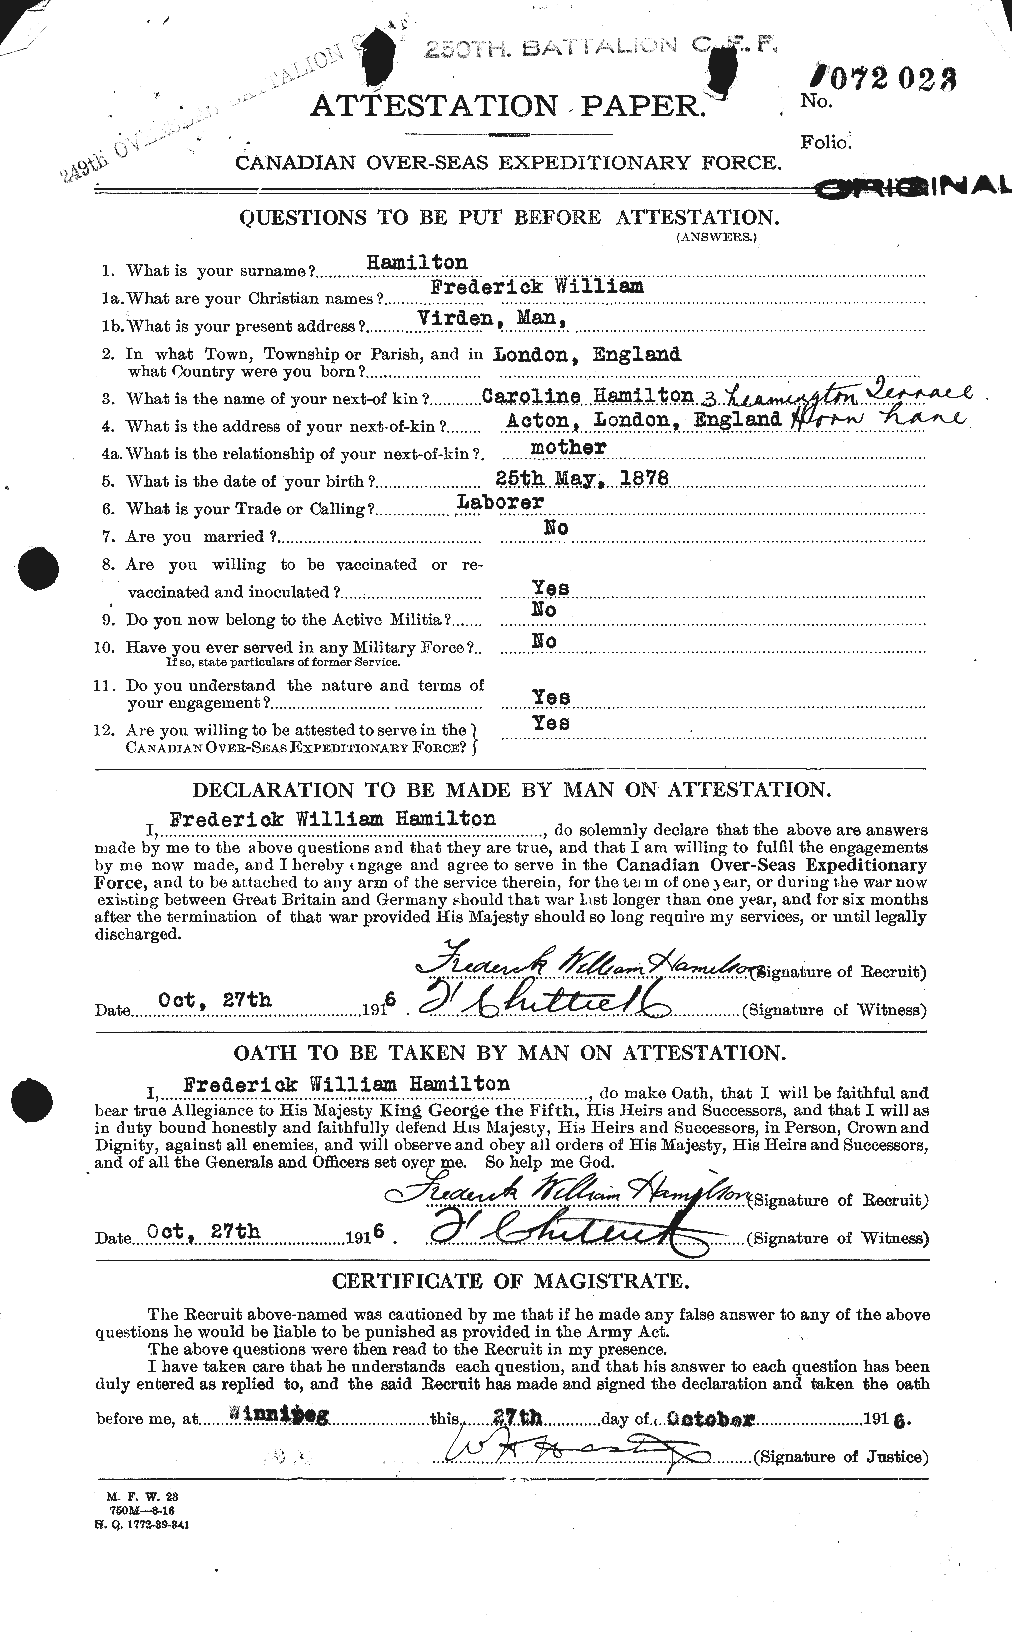 Personnel Records of the First World War - CEF 372418a